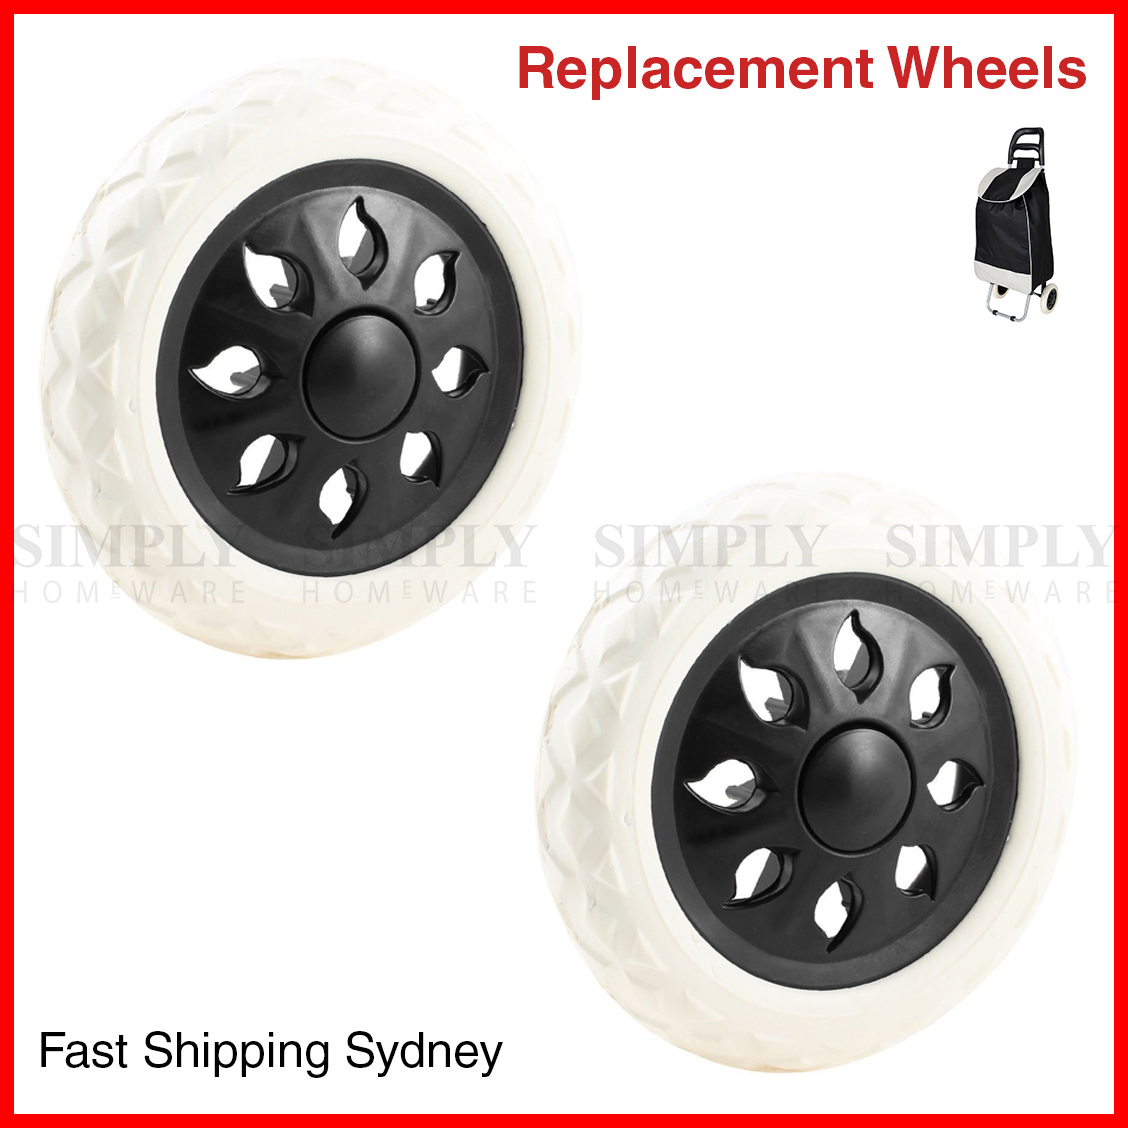 2x Replacement Wheels Shopping Cart Replace Trolley Foldable Luggage Black White